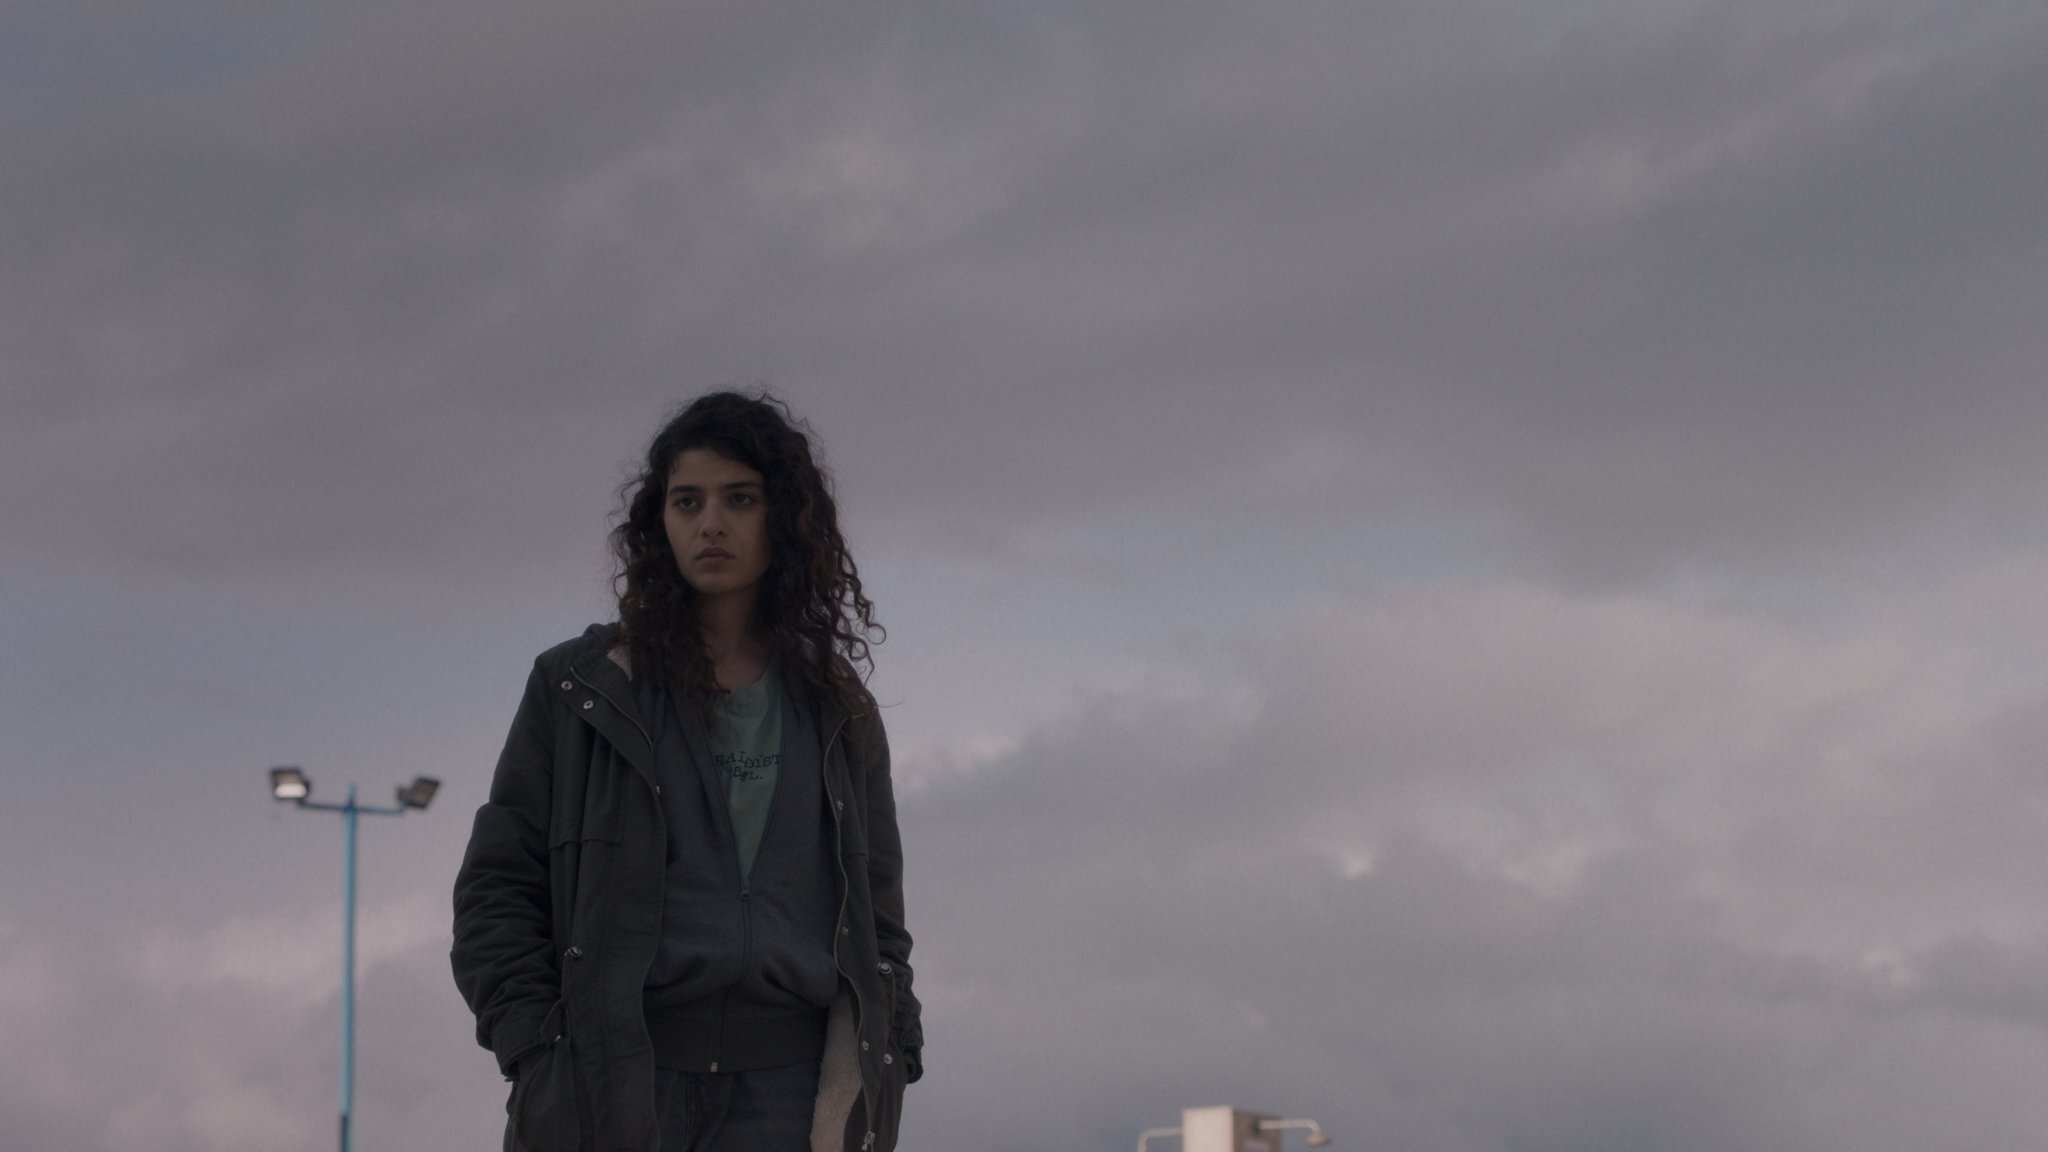 Director Ely Dagher's debut feature, 'The Sea Ahead', is one of the most striking Arab debuts of the year (Andolfi Productions/Abbout Productions/Wrong Men/Beaver and Beaver)